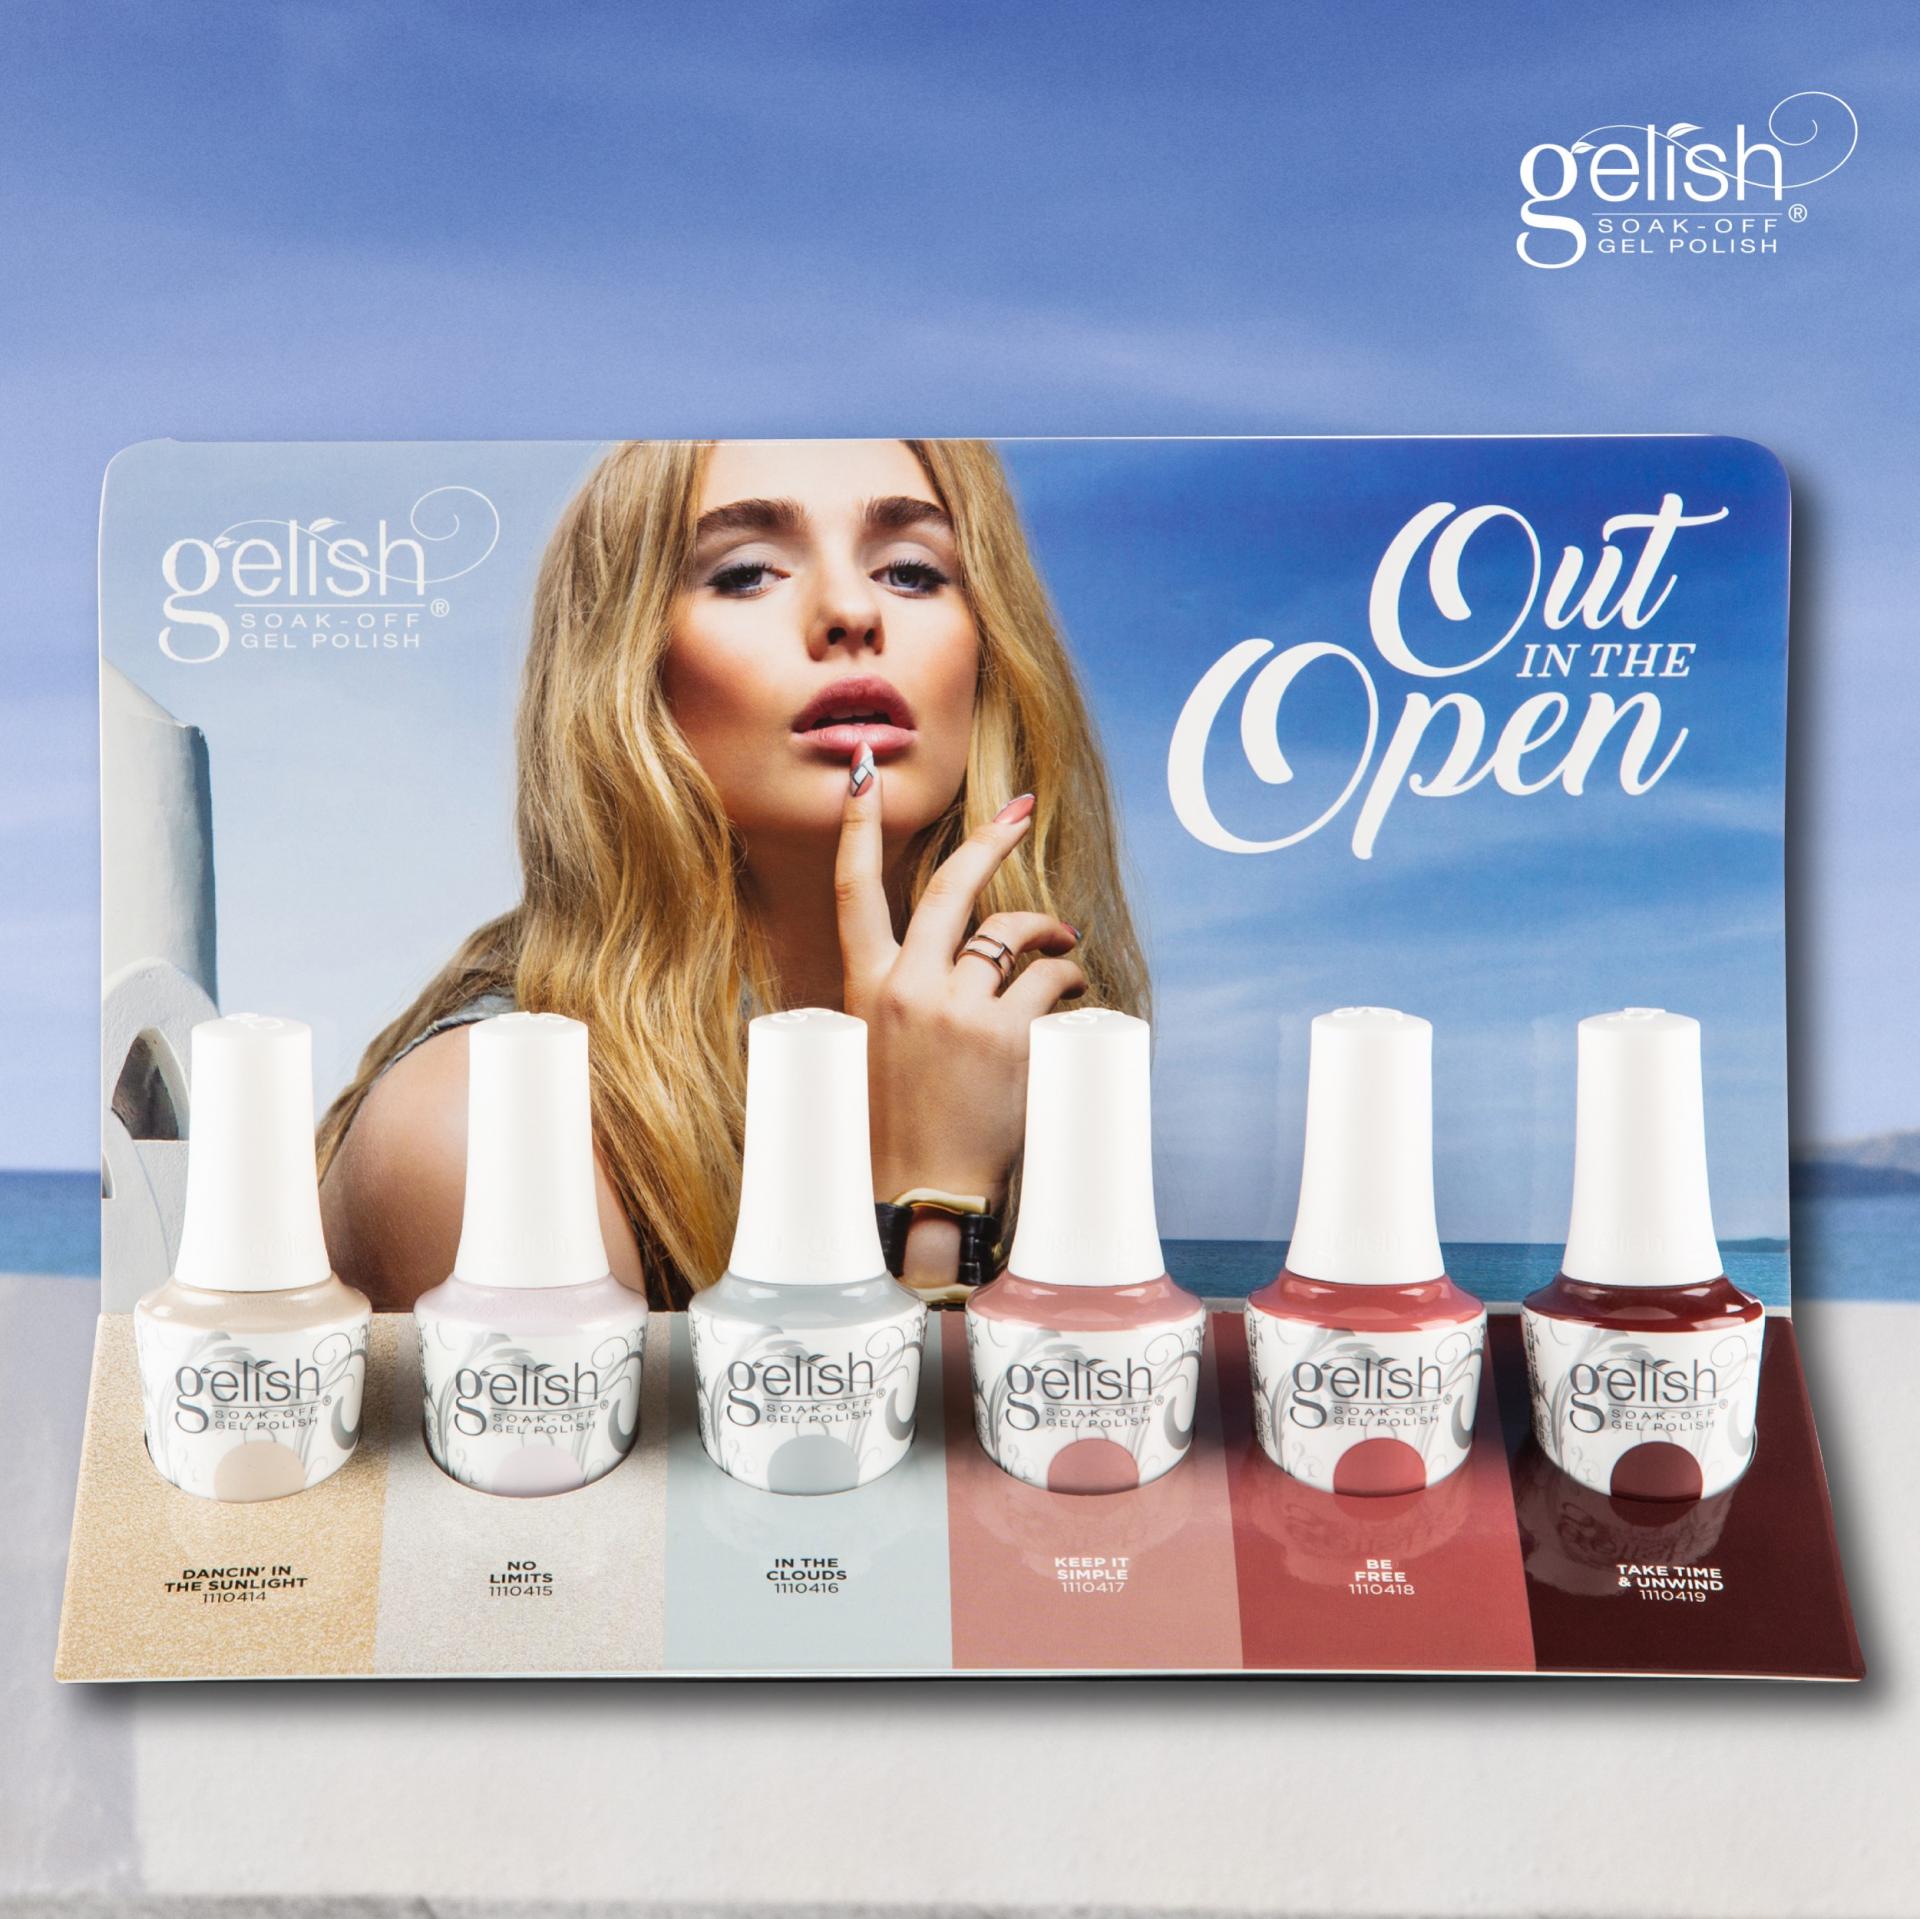 Wall outintheopen gelish